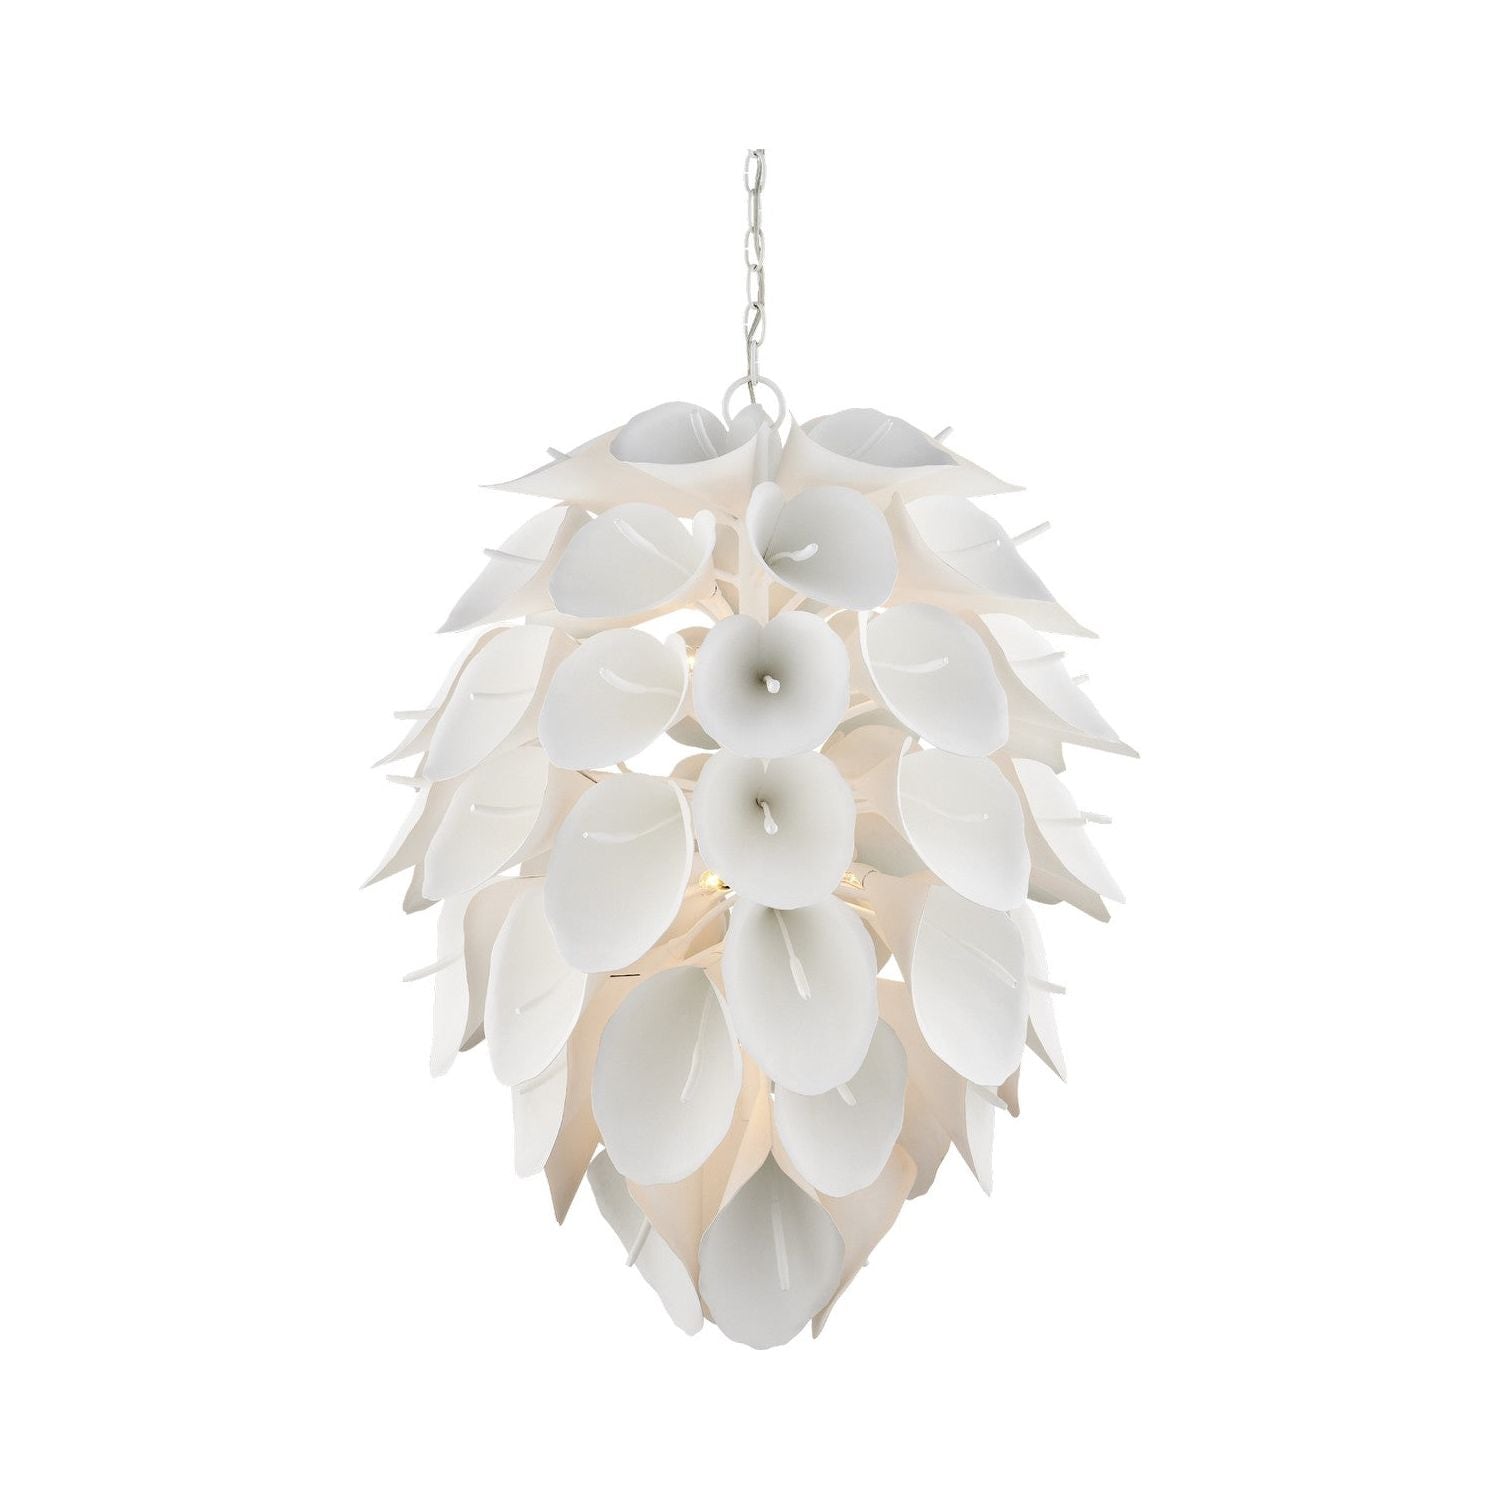 Currey and Company - 9000-1206 - Nine Light Chandelier - Gesso White